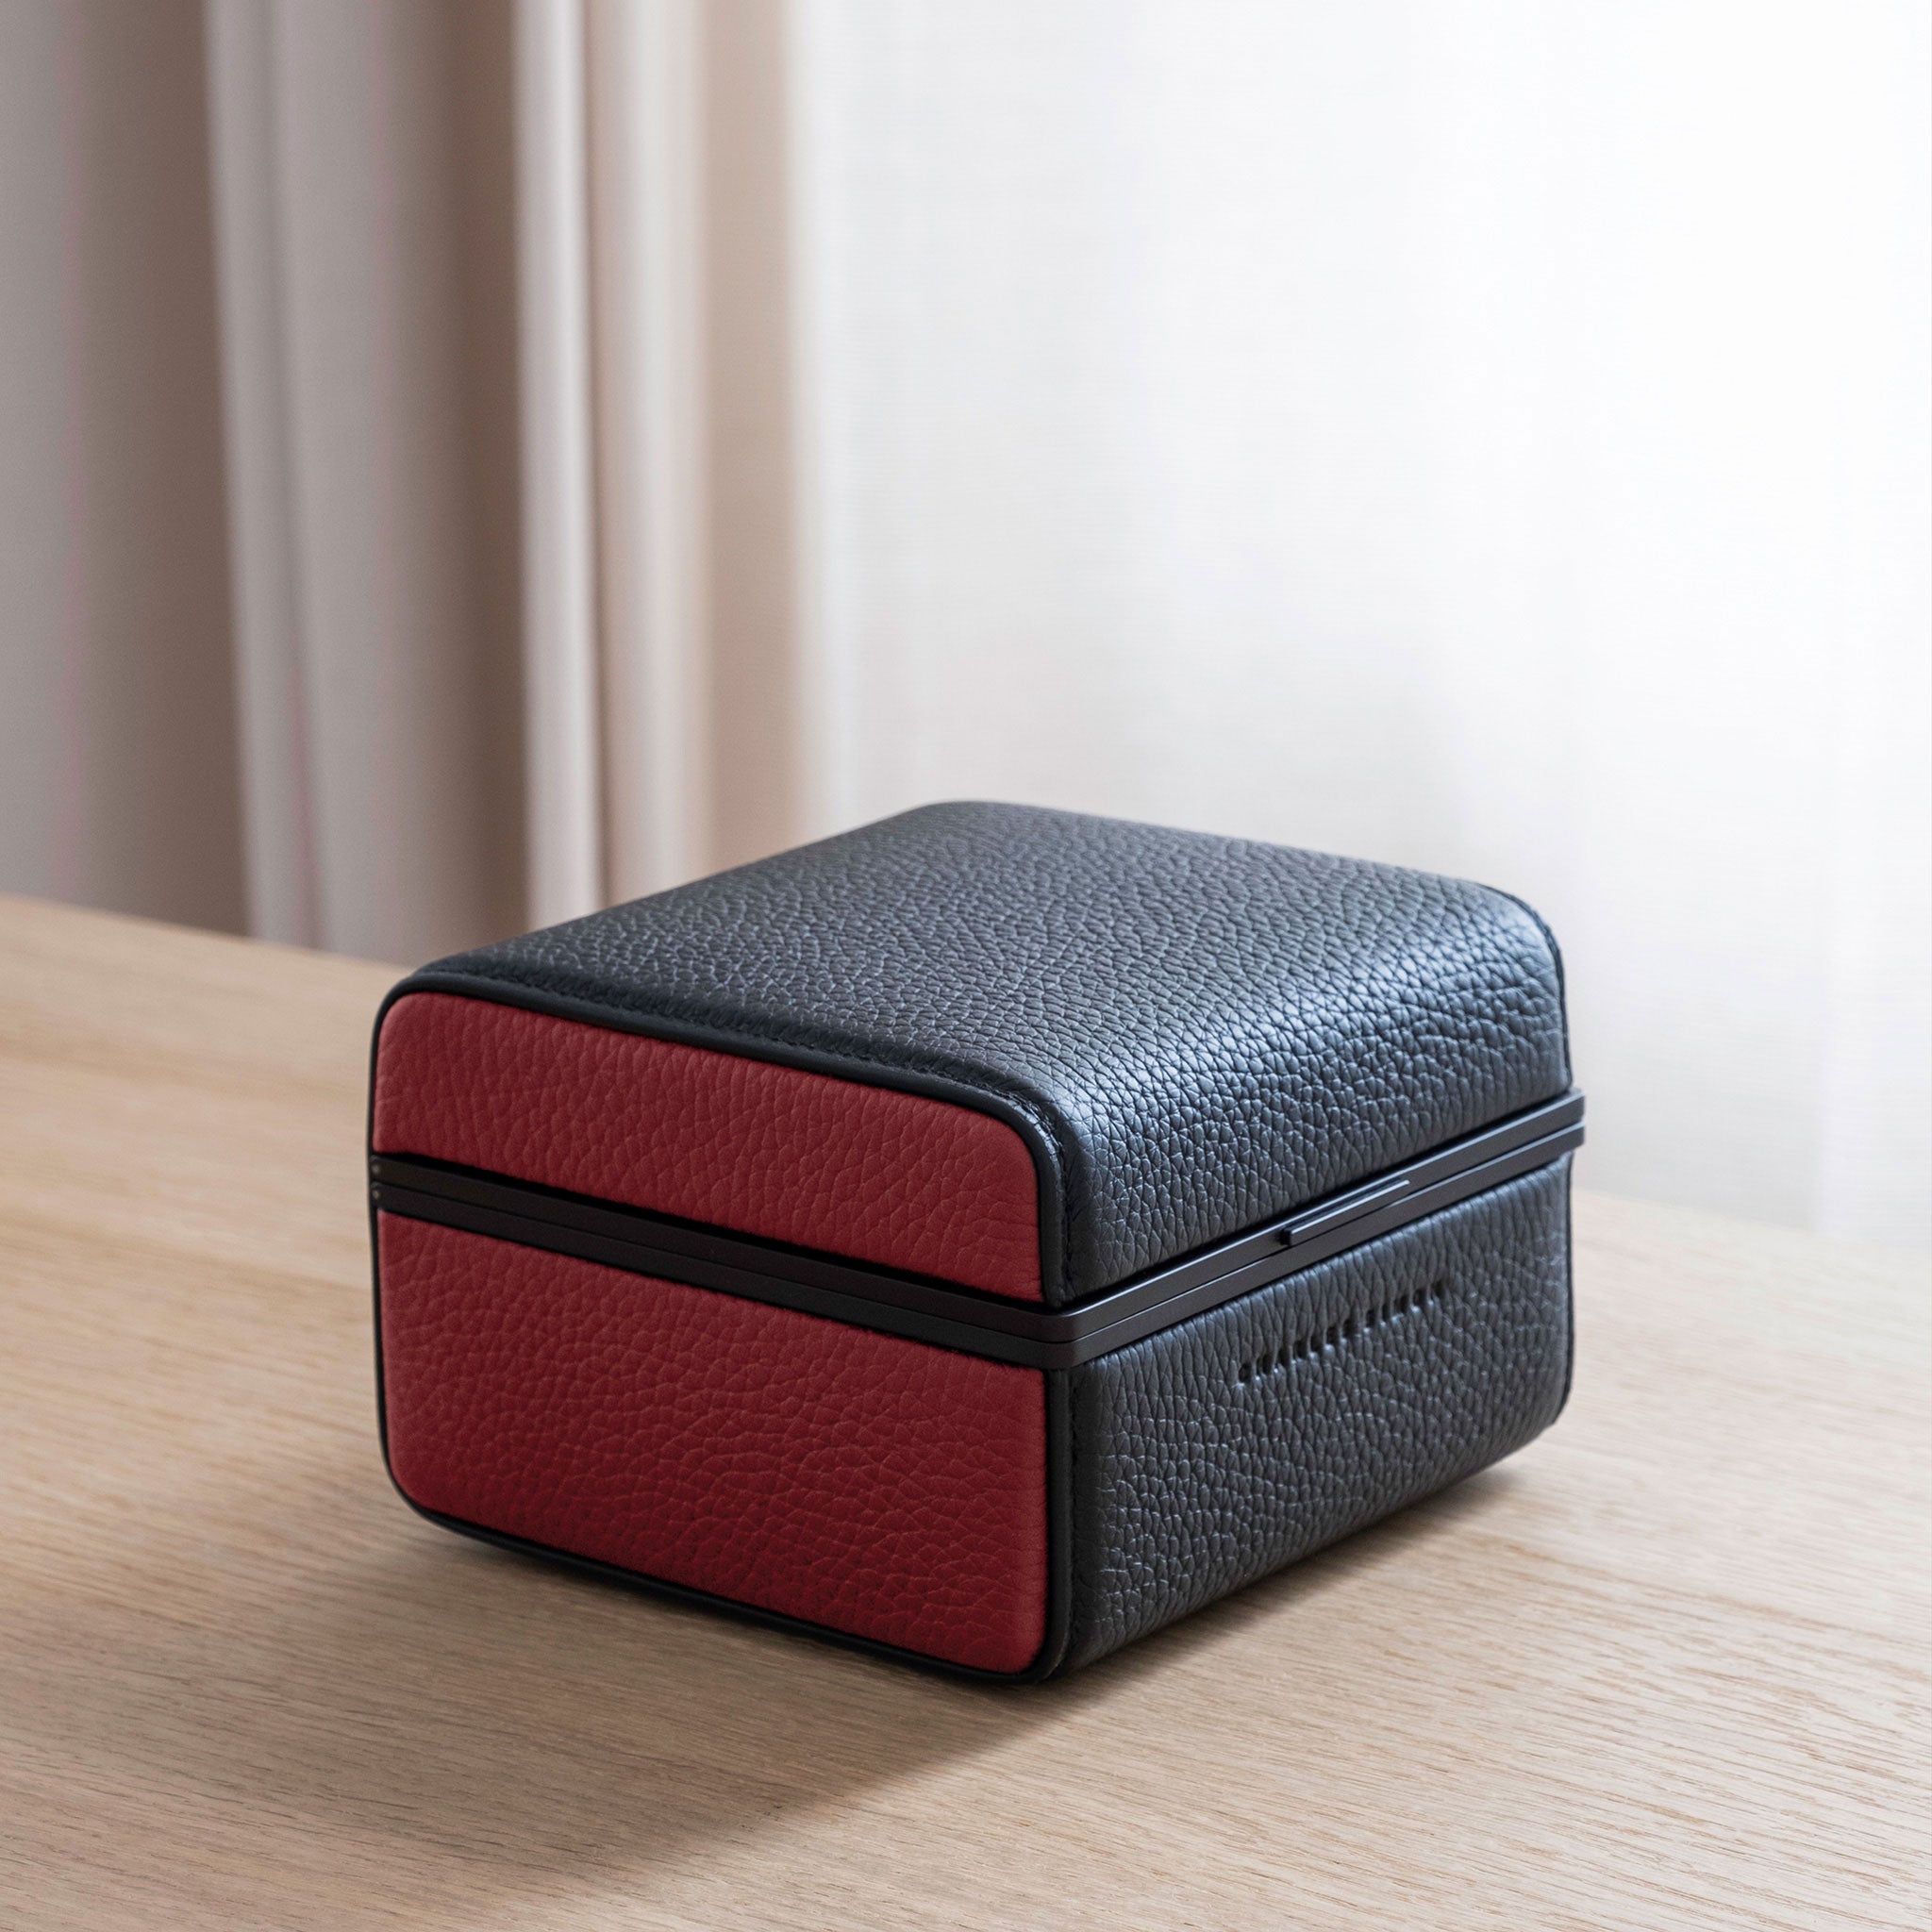 Lifestyle photo of closed Eaton 1 Watch case in black and contrasting red leather and black anodized aluminum